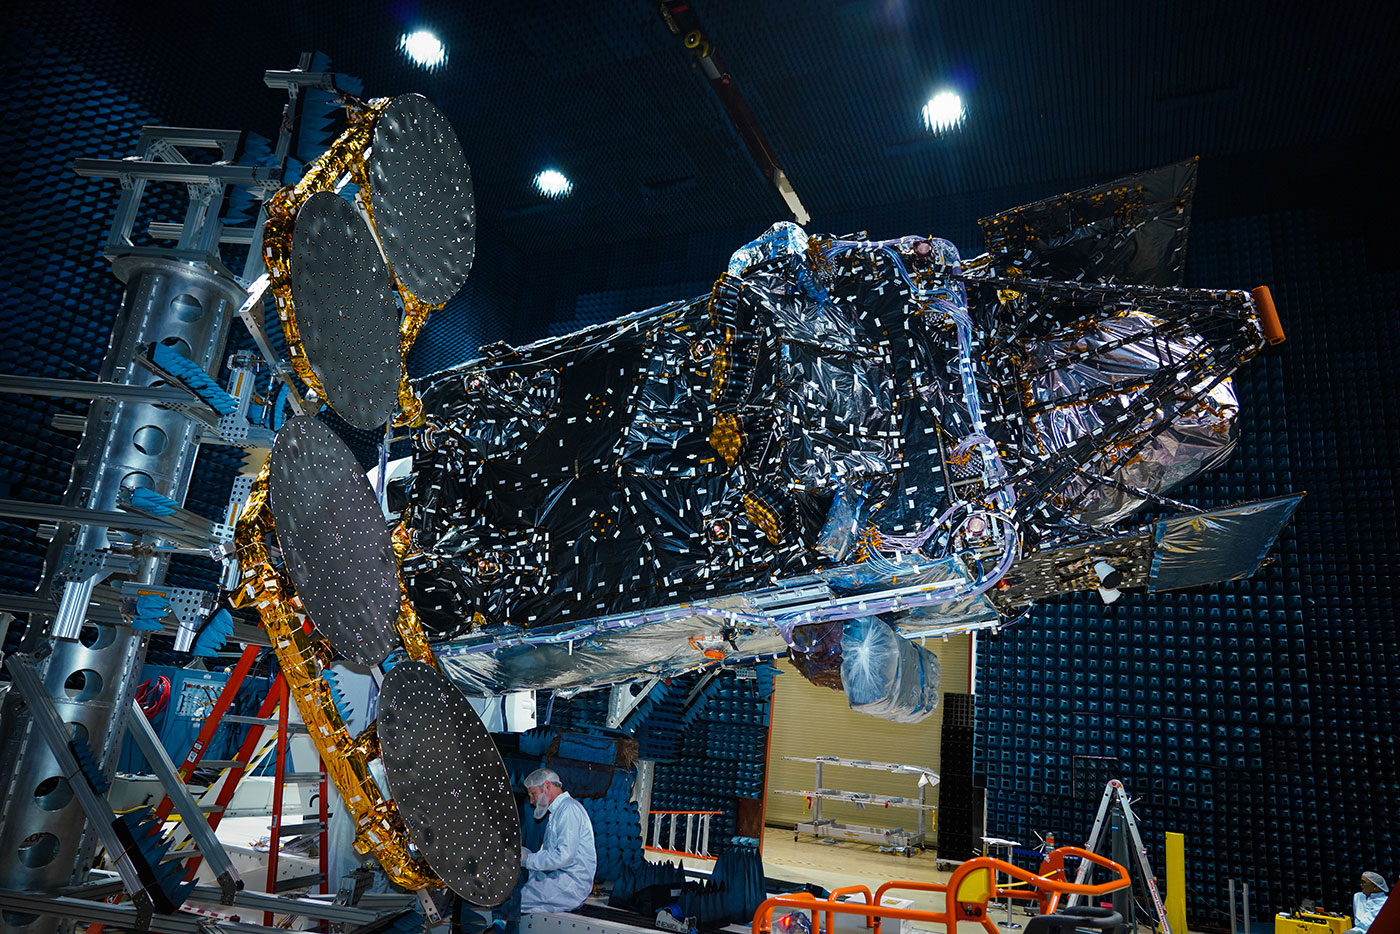 The TEMPO air pollution sensor is hosted on Intelsat 40e, seen here at the Maxar Technologies facility in Palo Alto, California, where it was built. The instrument and the entire spacecraft recently passed pre-launch testing at the facility.